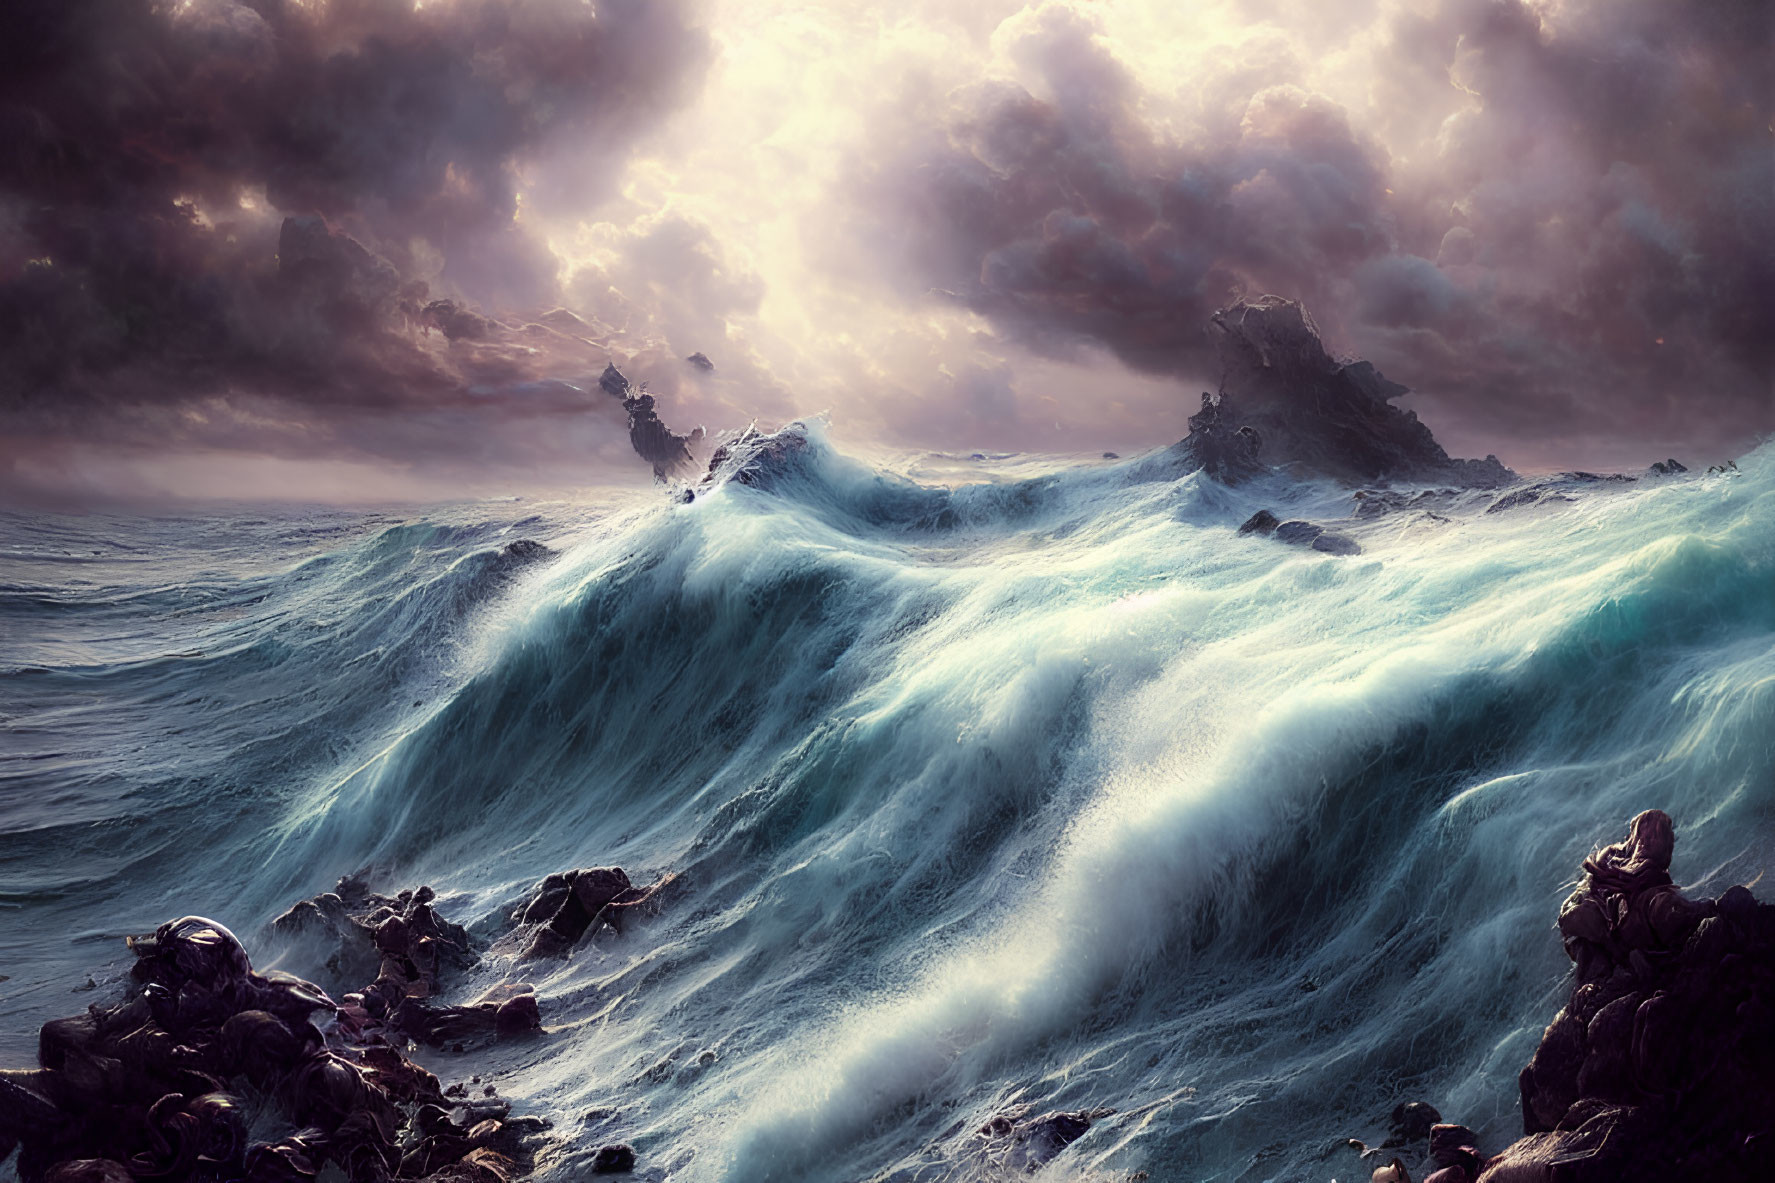 Towering Waves and Turbulent Sky in Dramatic Seascape